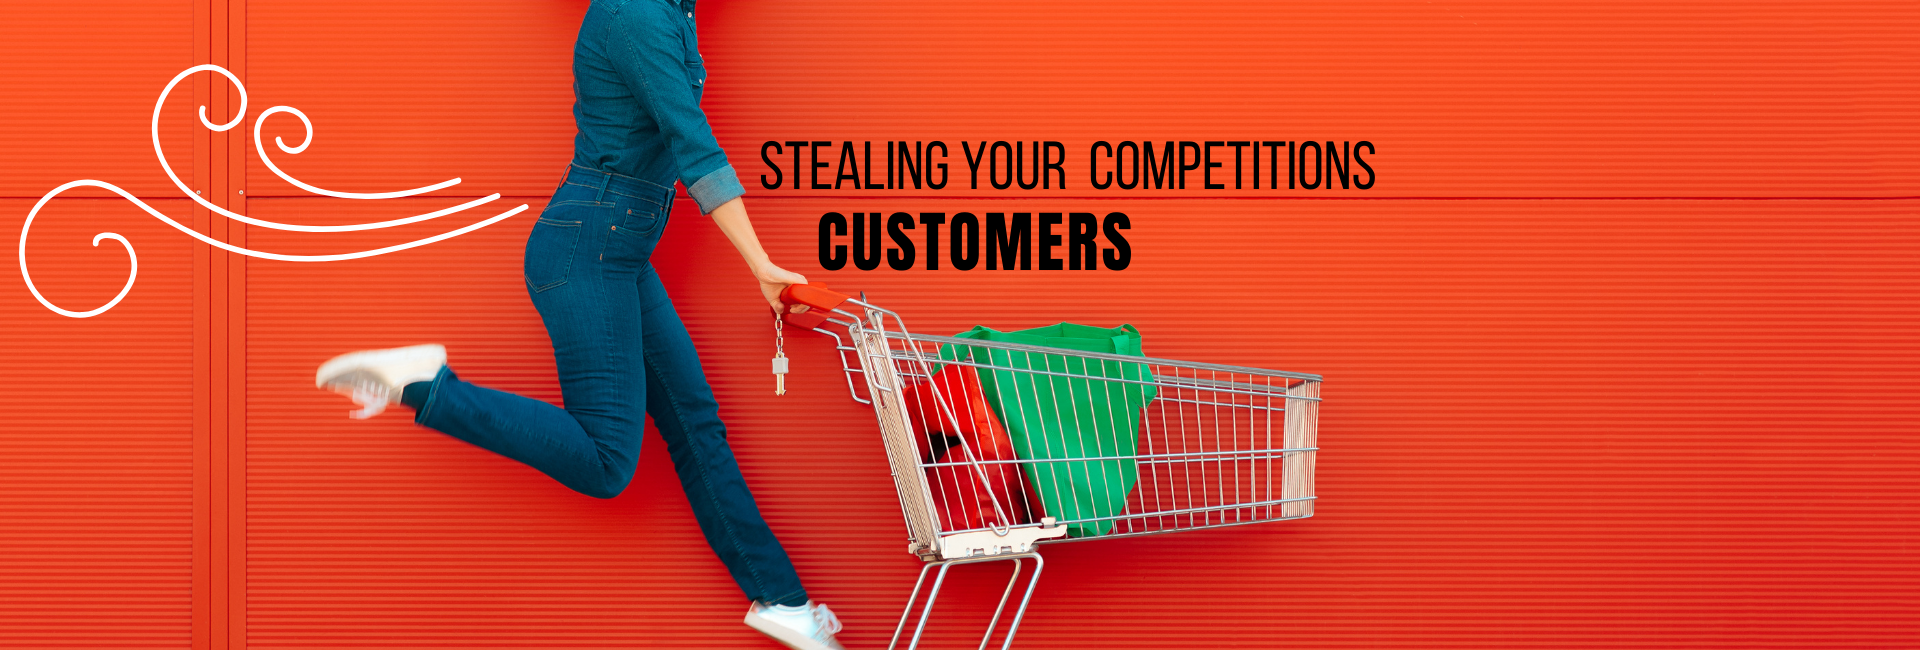 Stealing your Competitors Customers the Right Way